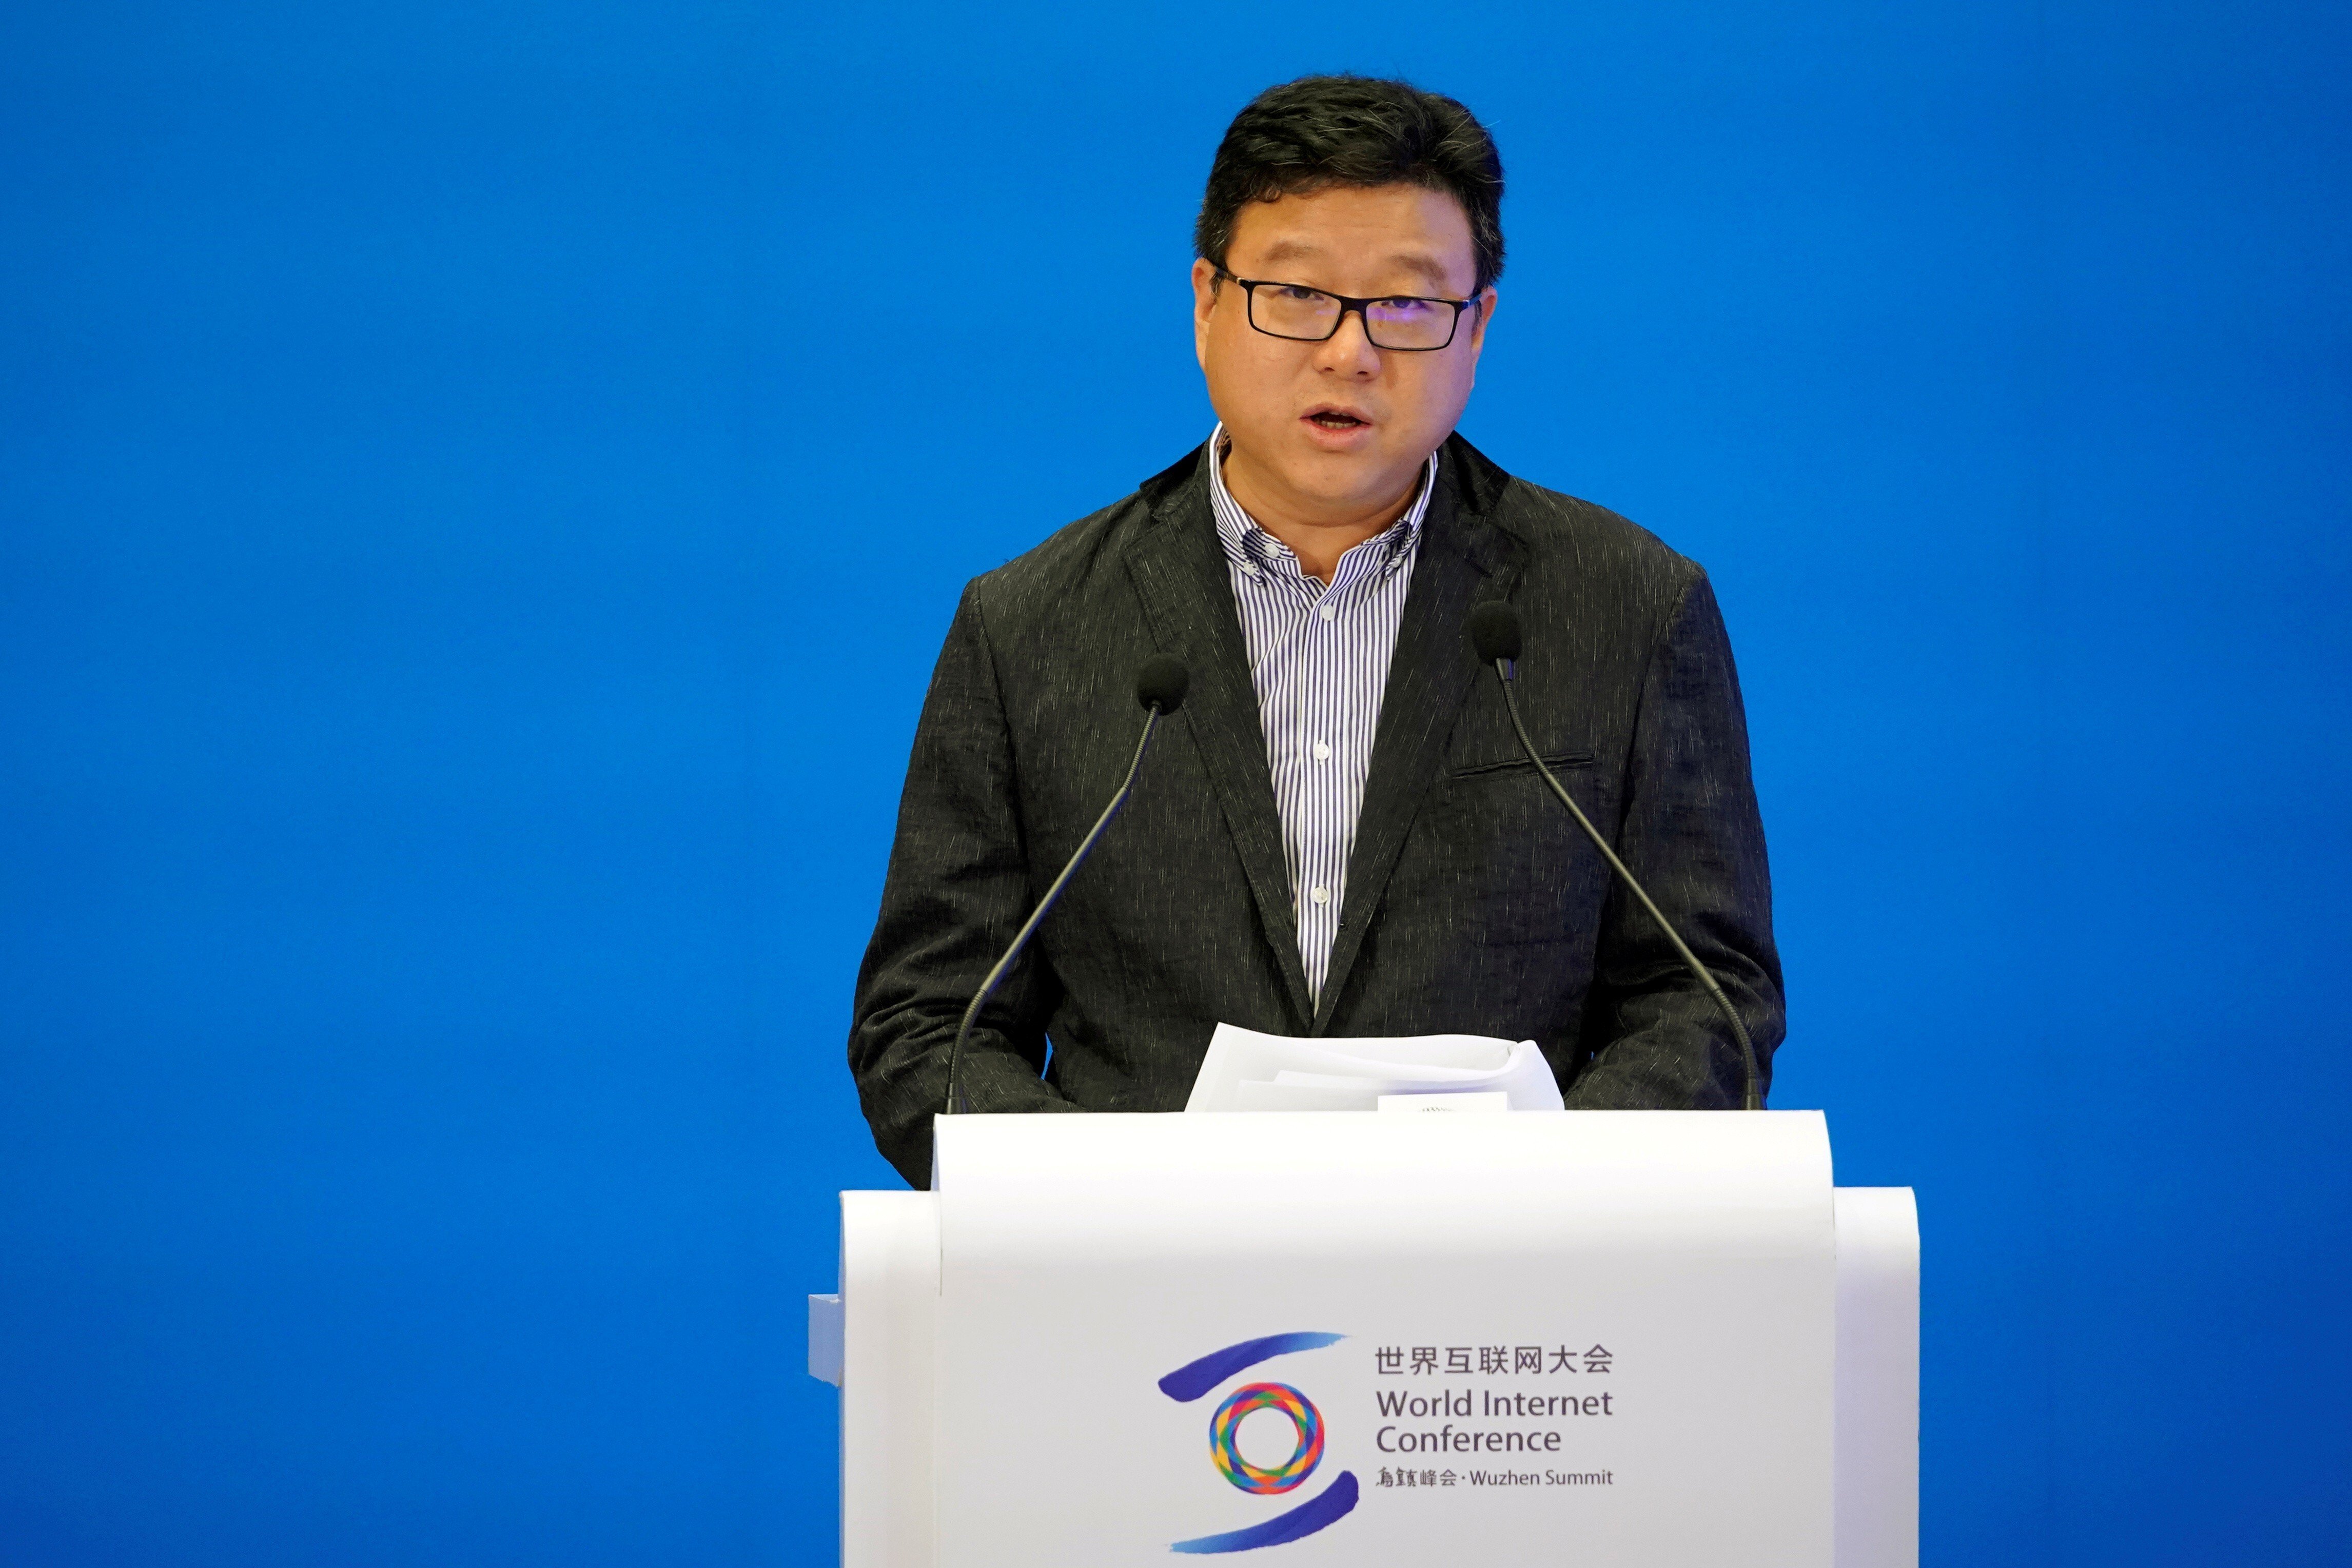 Ding Lei, founder and CEO of NetEase attends the World Internet Conference (WIC) in Wuzhen, Zhejiang province, China, October 20, 2019. Photo: Reuters